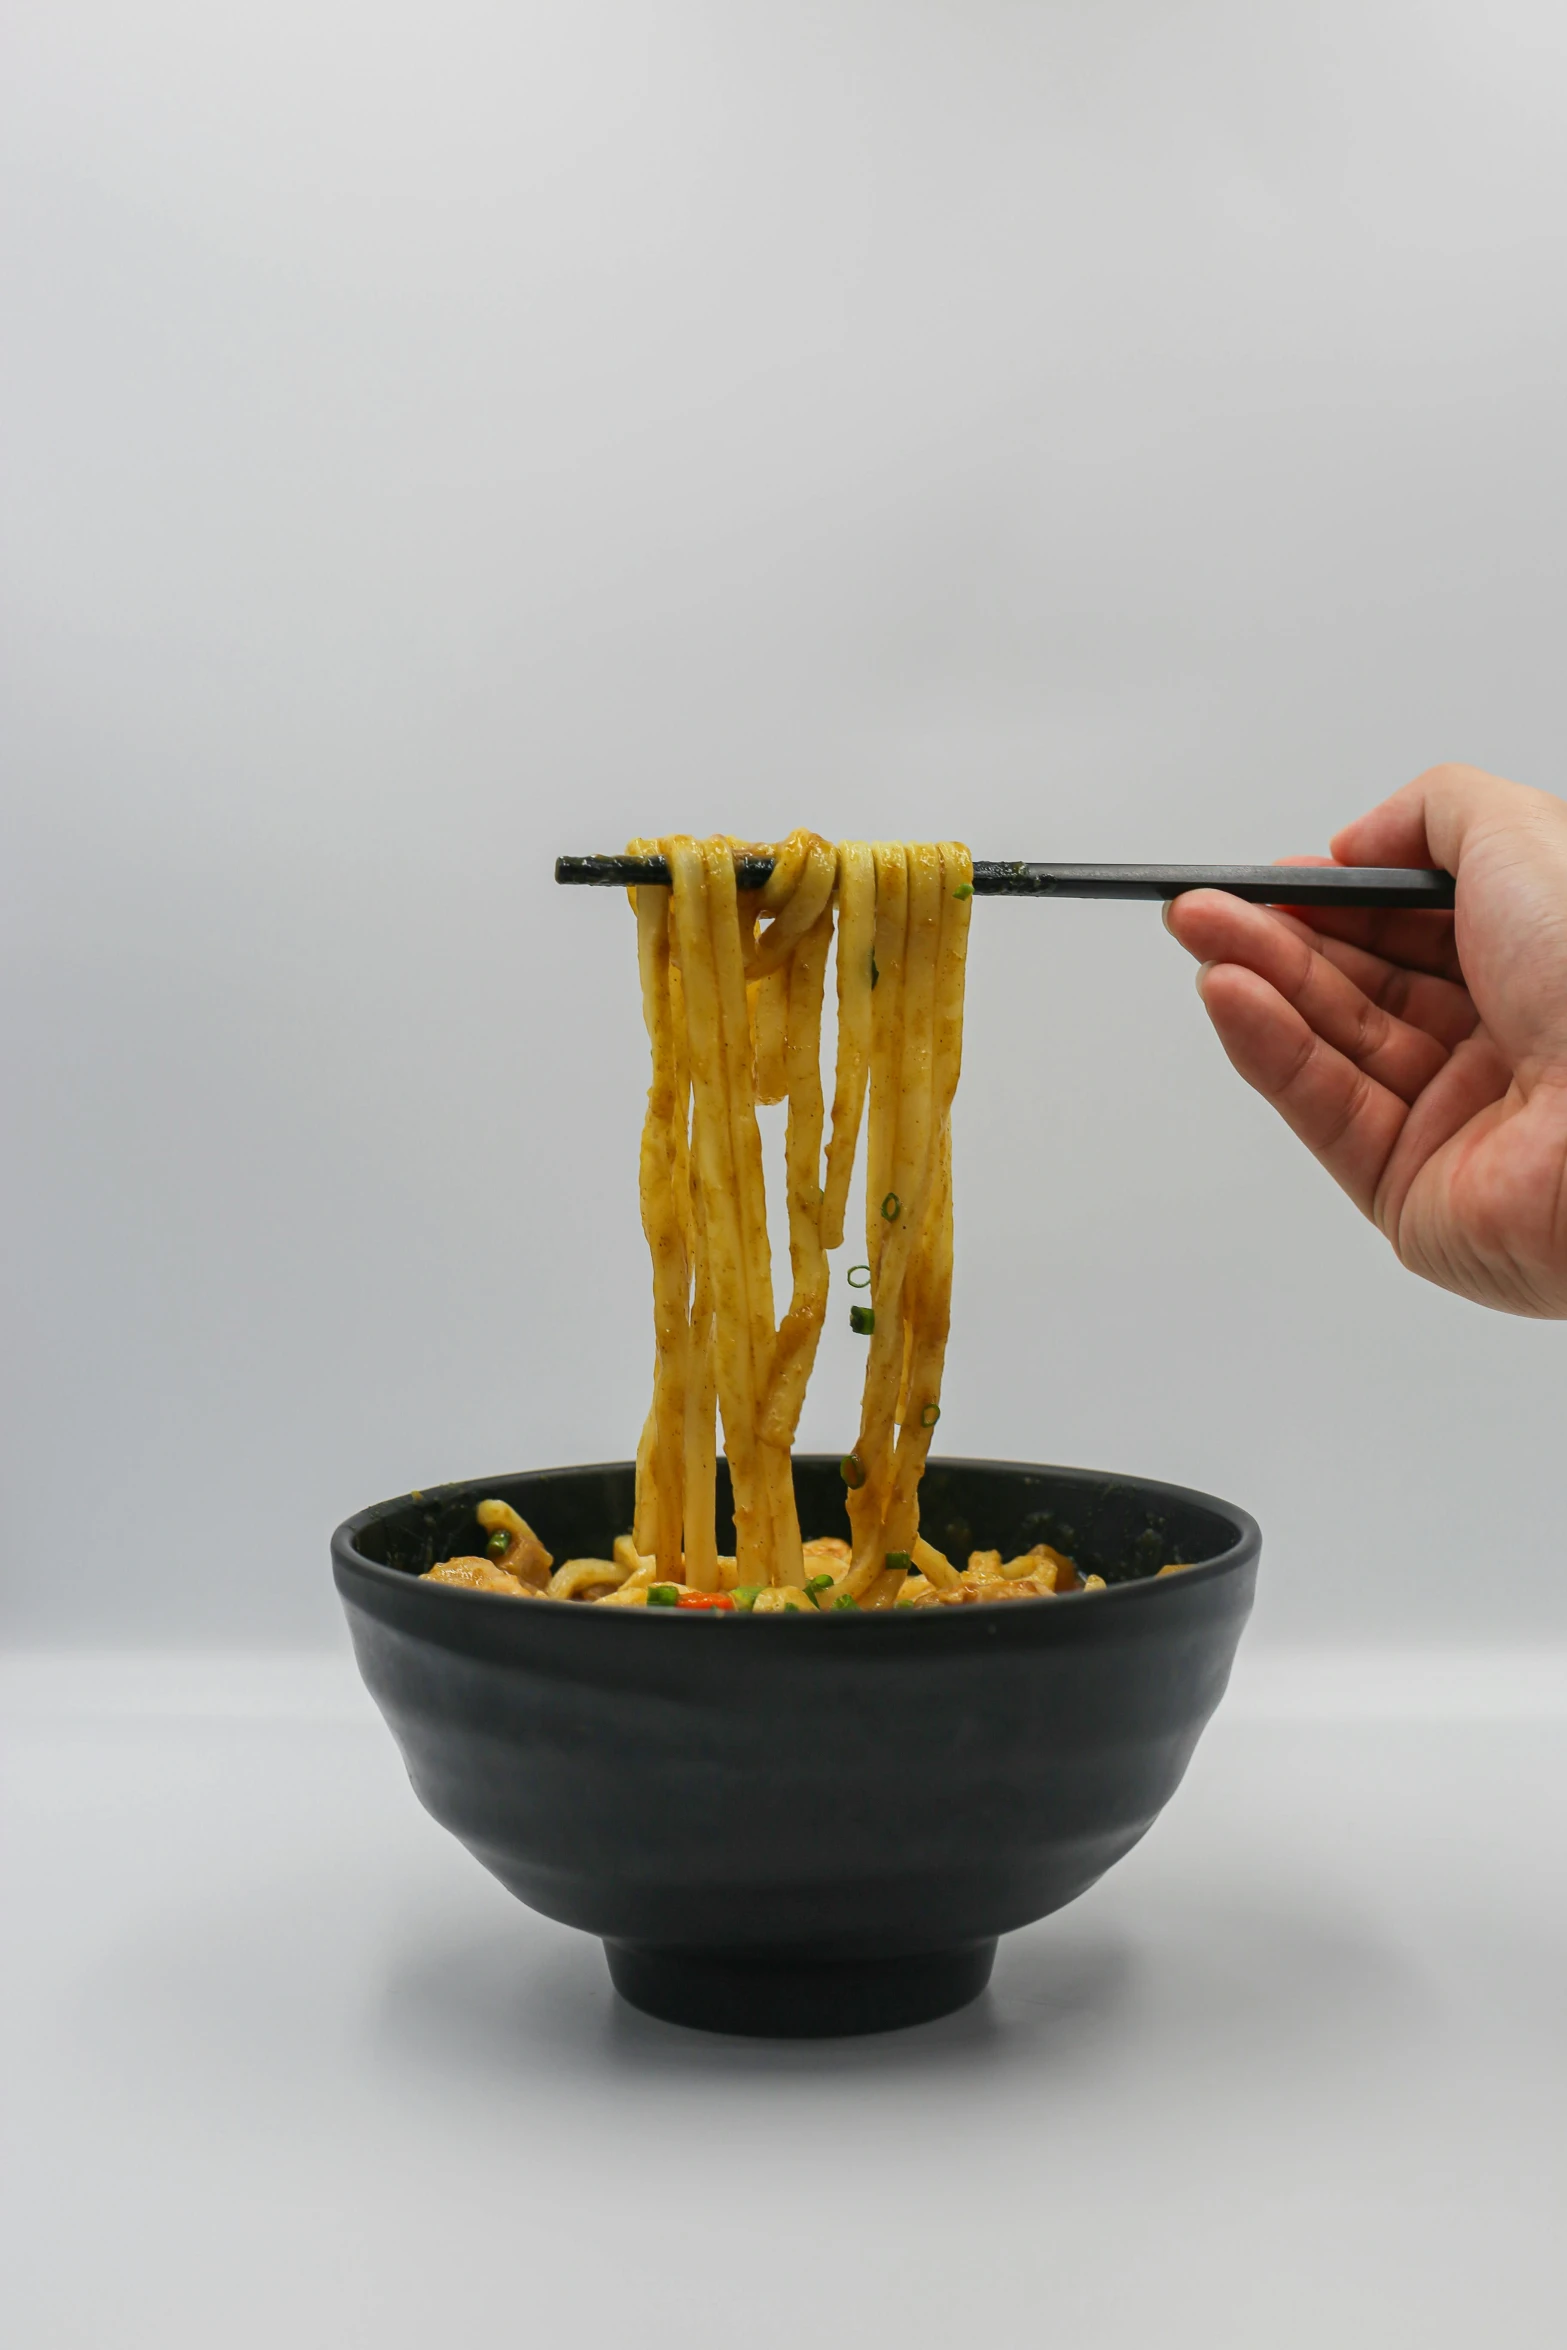 a hand is holding chopsticks over a black bowl filled with noodles